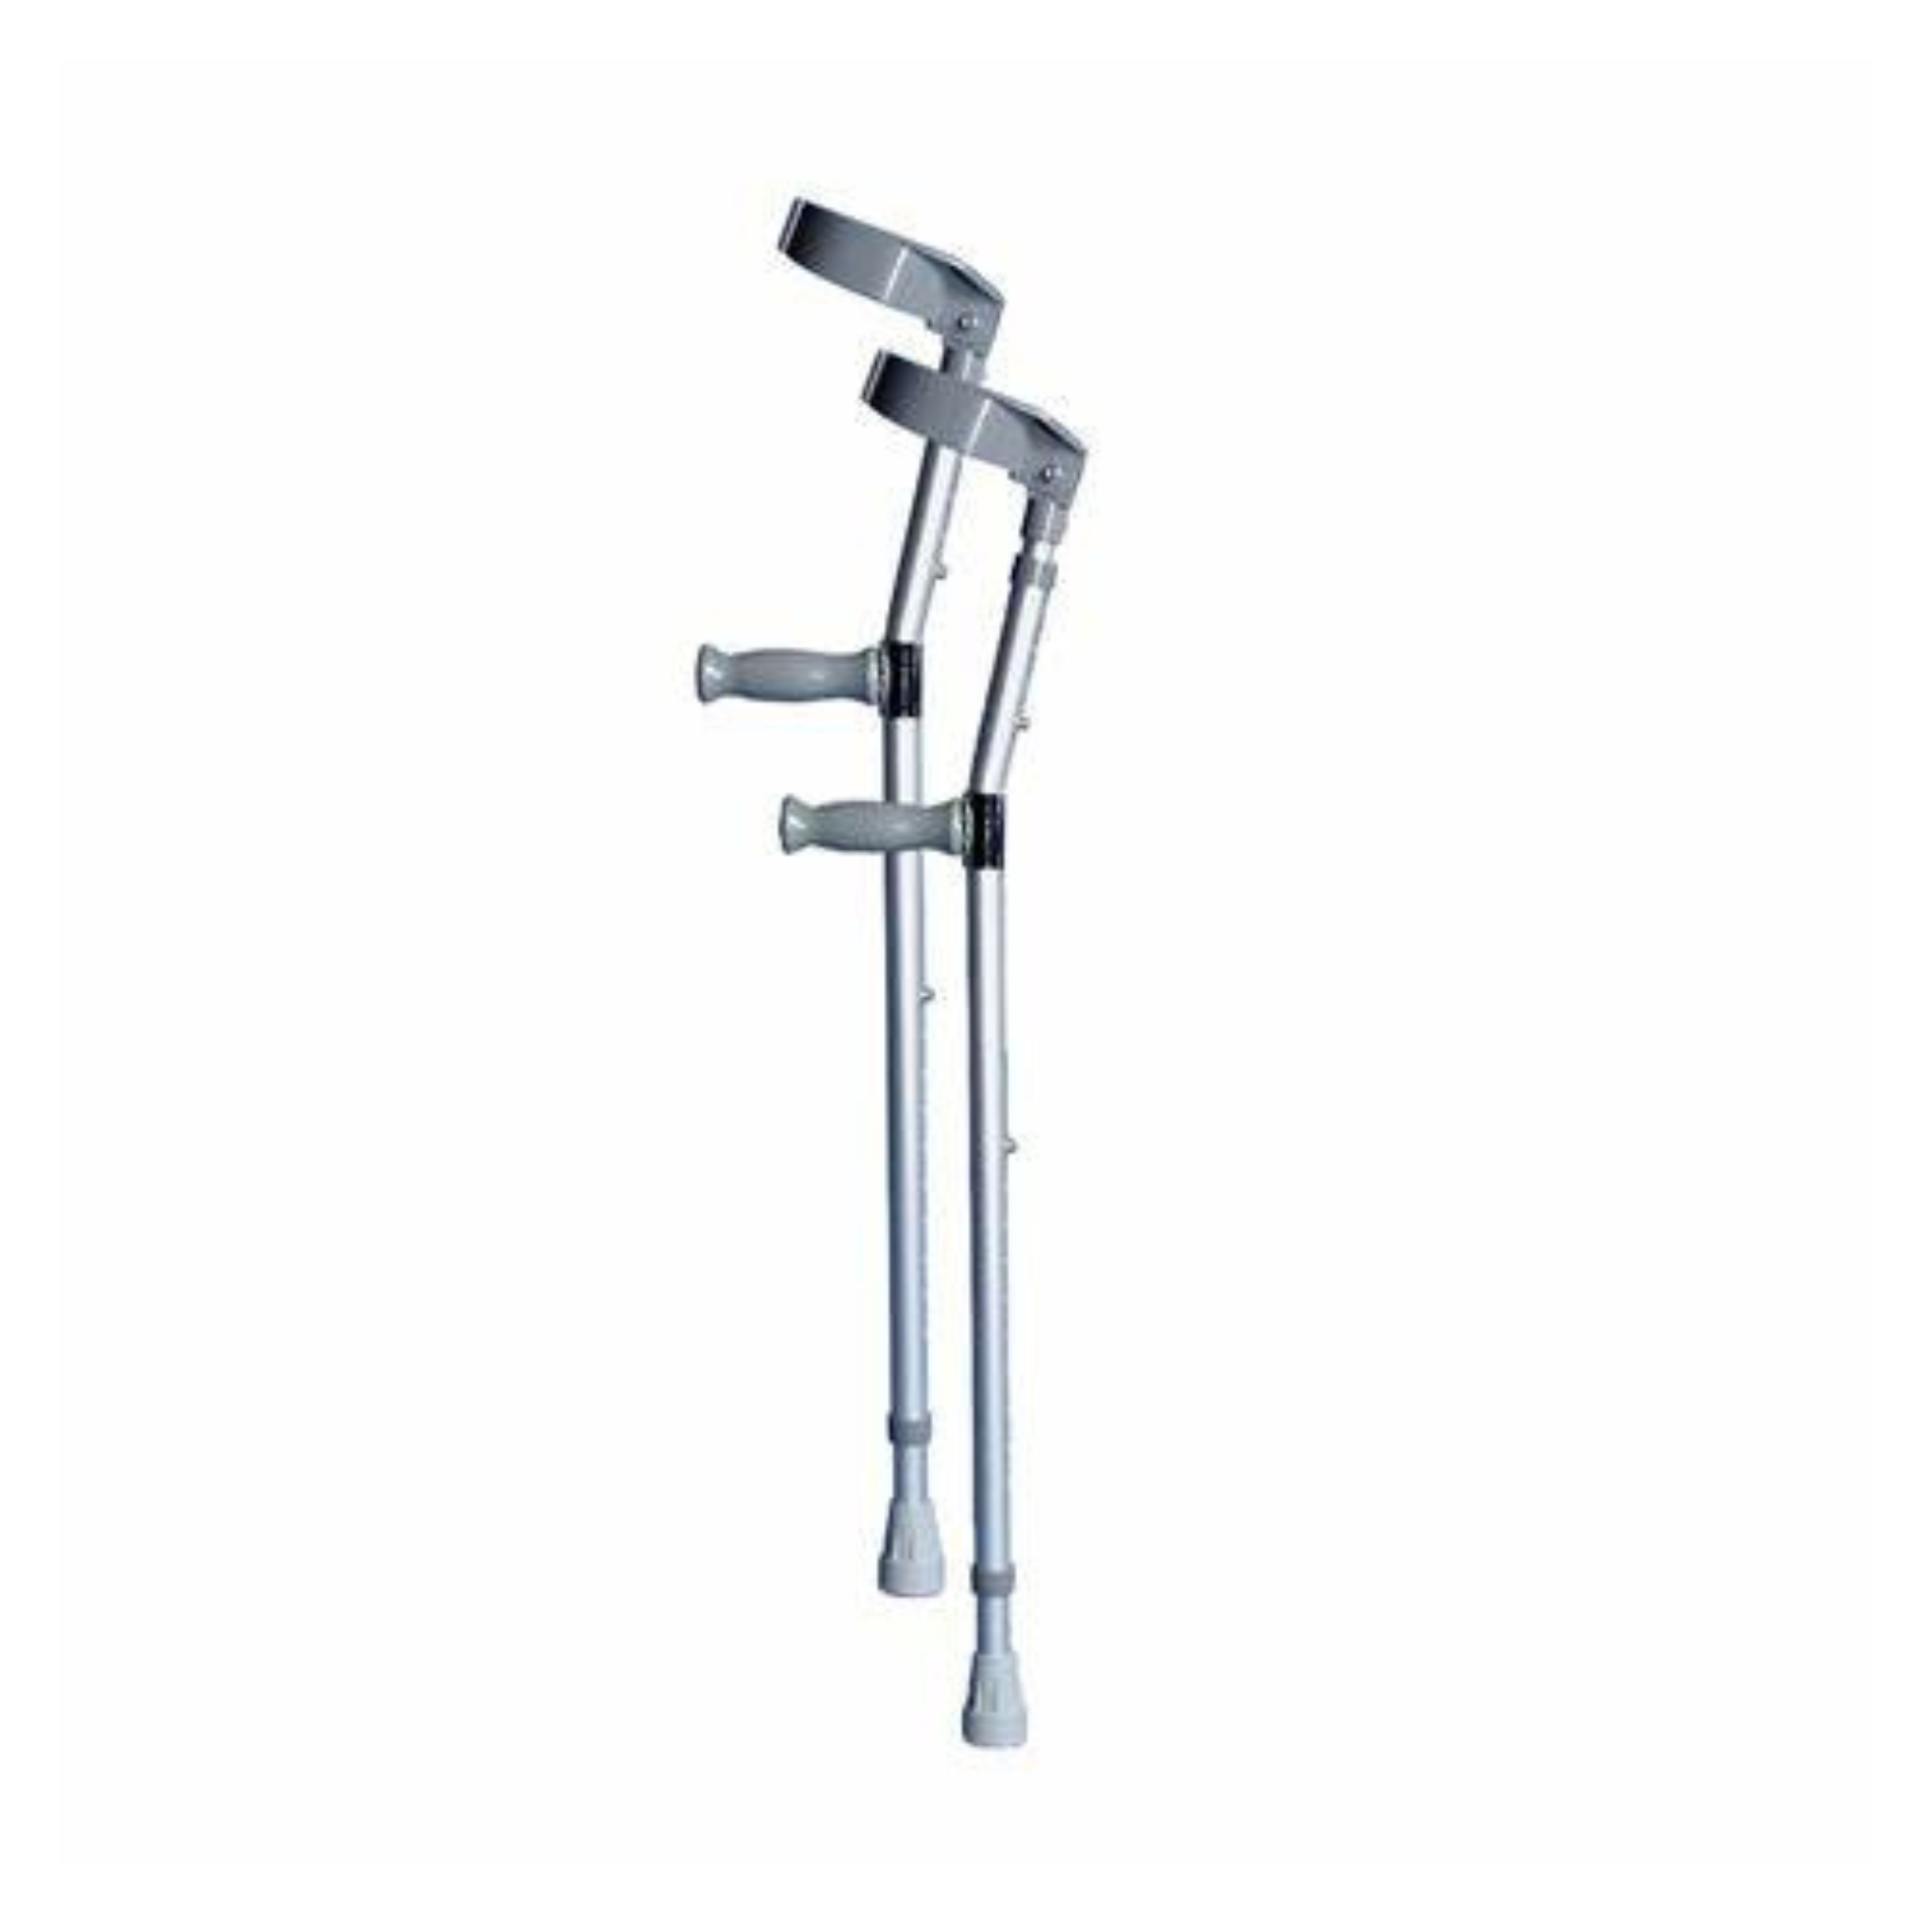 Rental - Standard Forearm Crutches, Adult from Aged Care and Medical - Crutches for hire for aged care